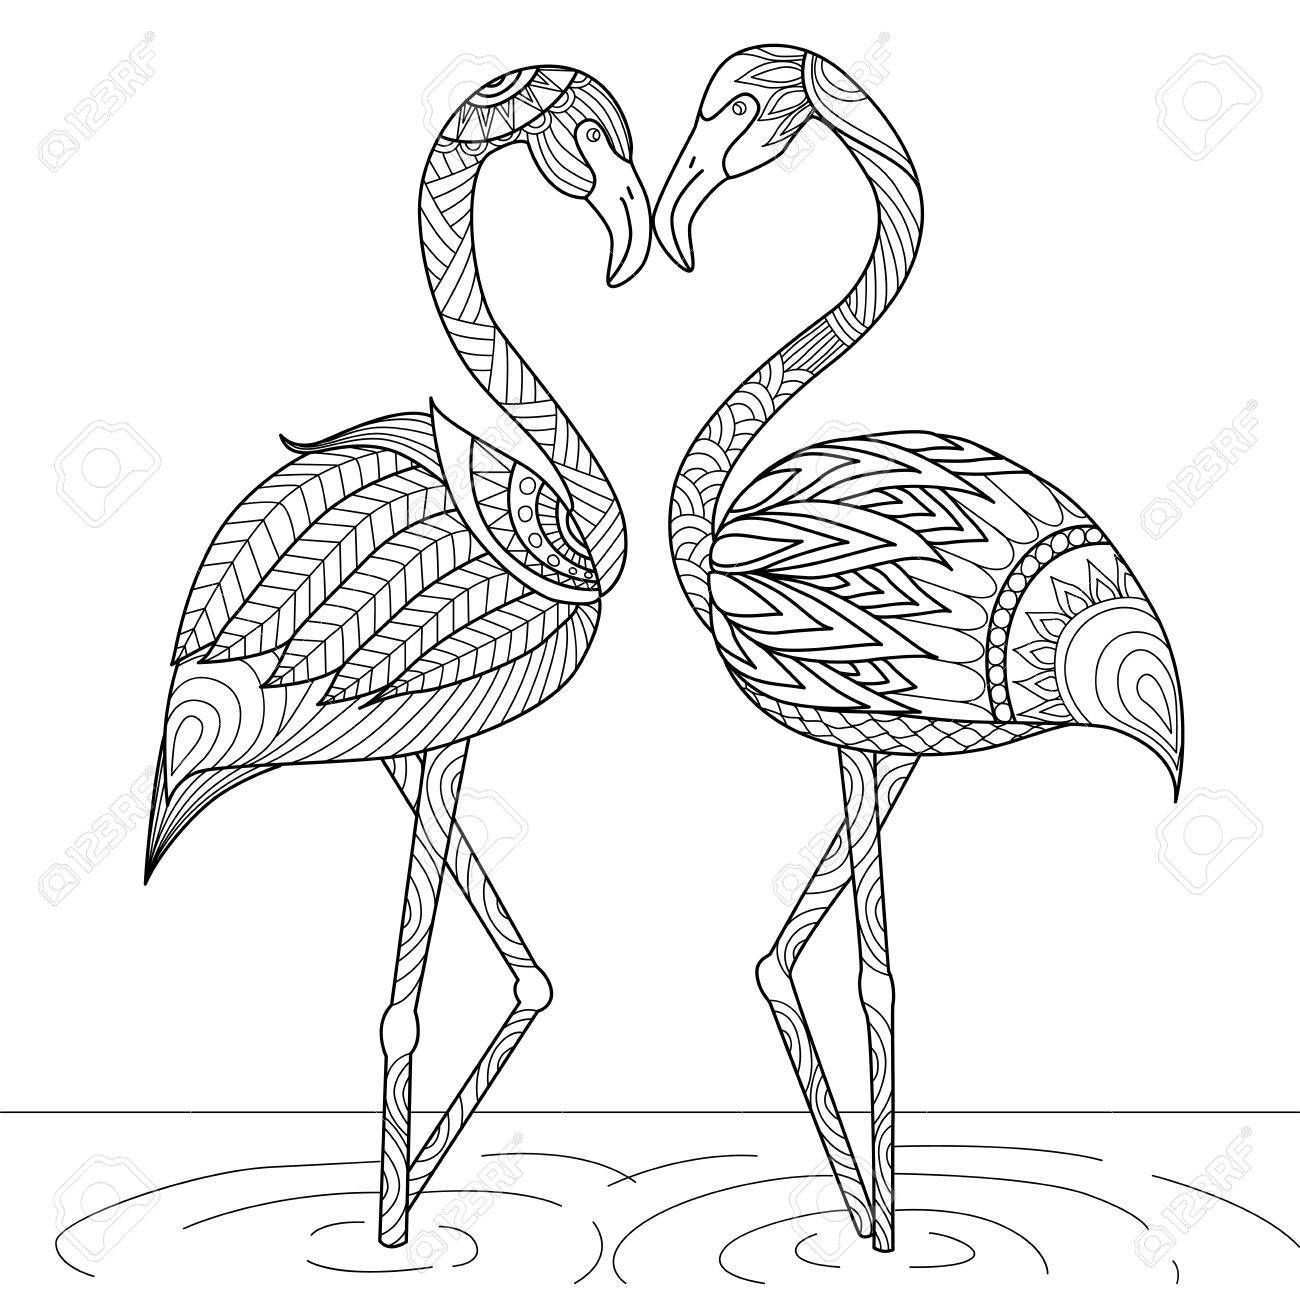 Hand Drawn Flamingo Couple Style For Coloring Book Invitation Animal Coloring Pages Flamingo Coloring Page Bird Coloring Pages